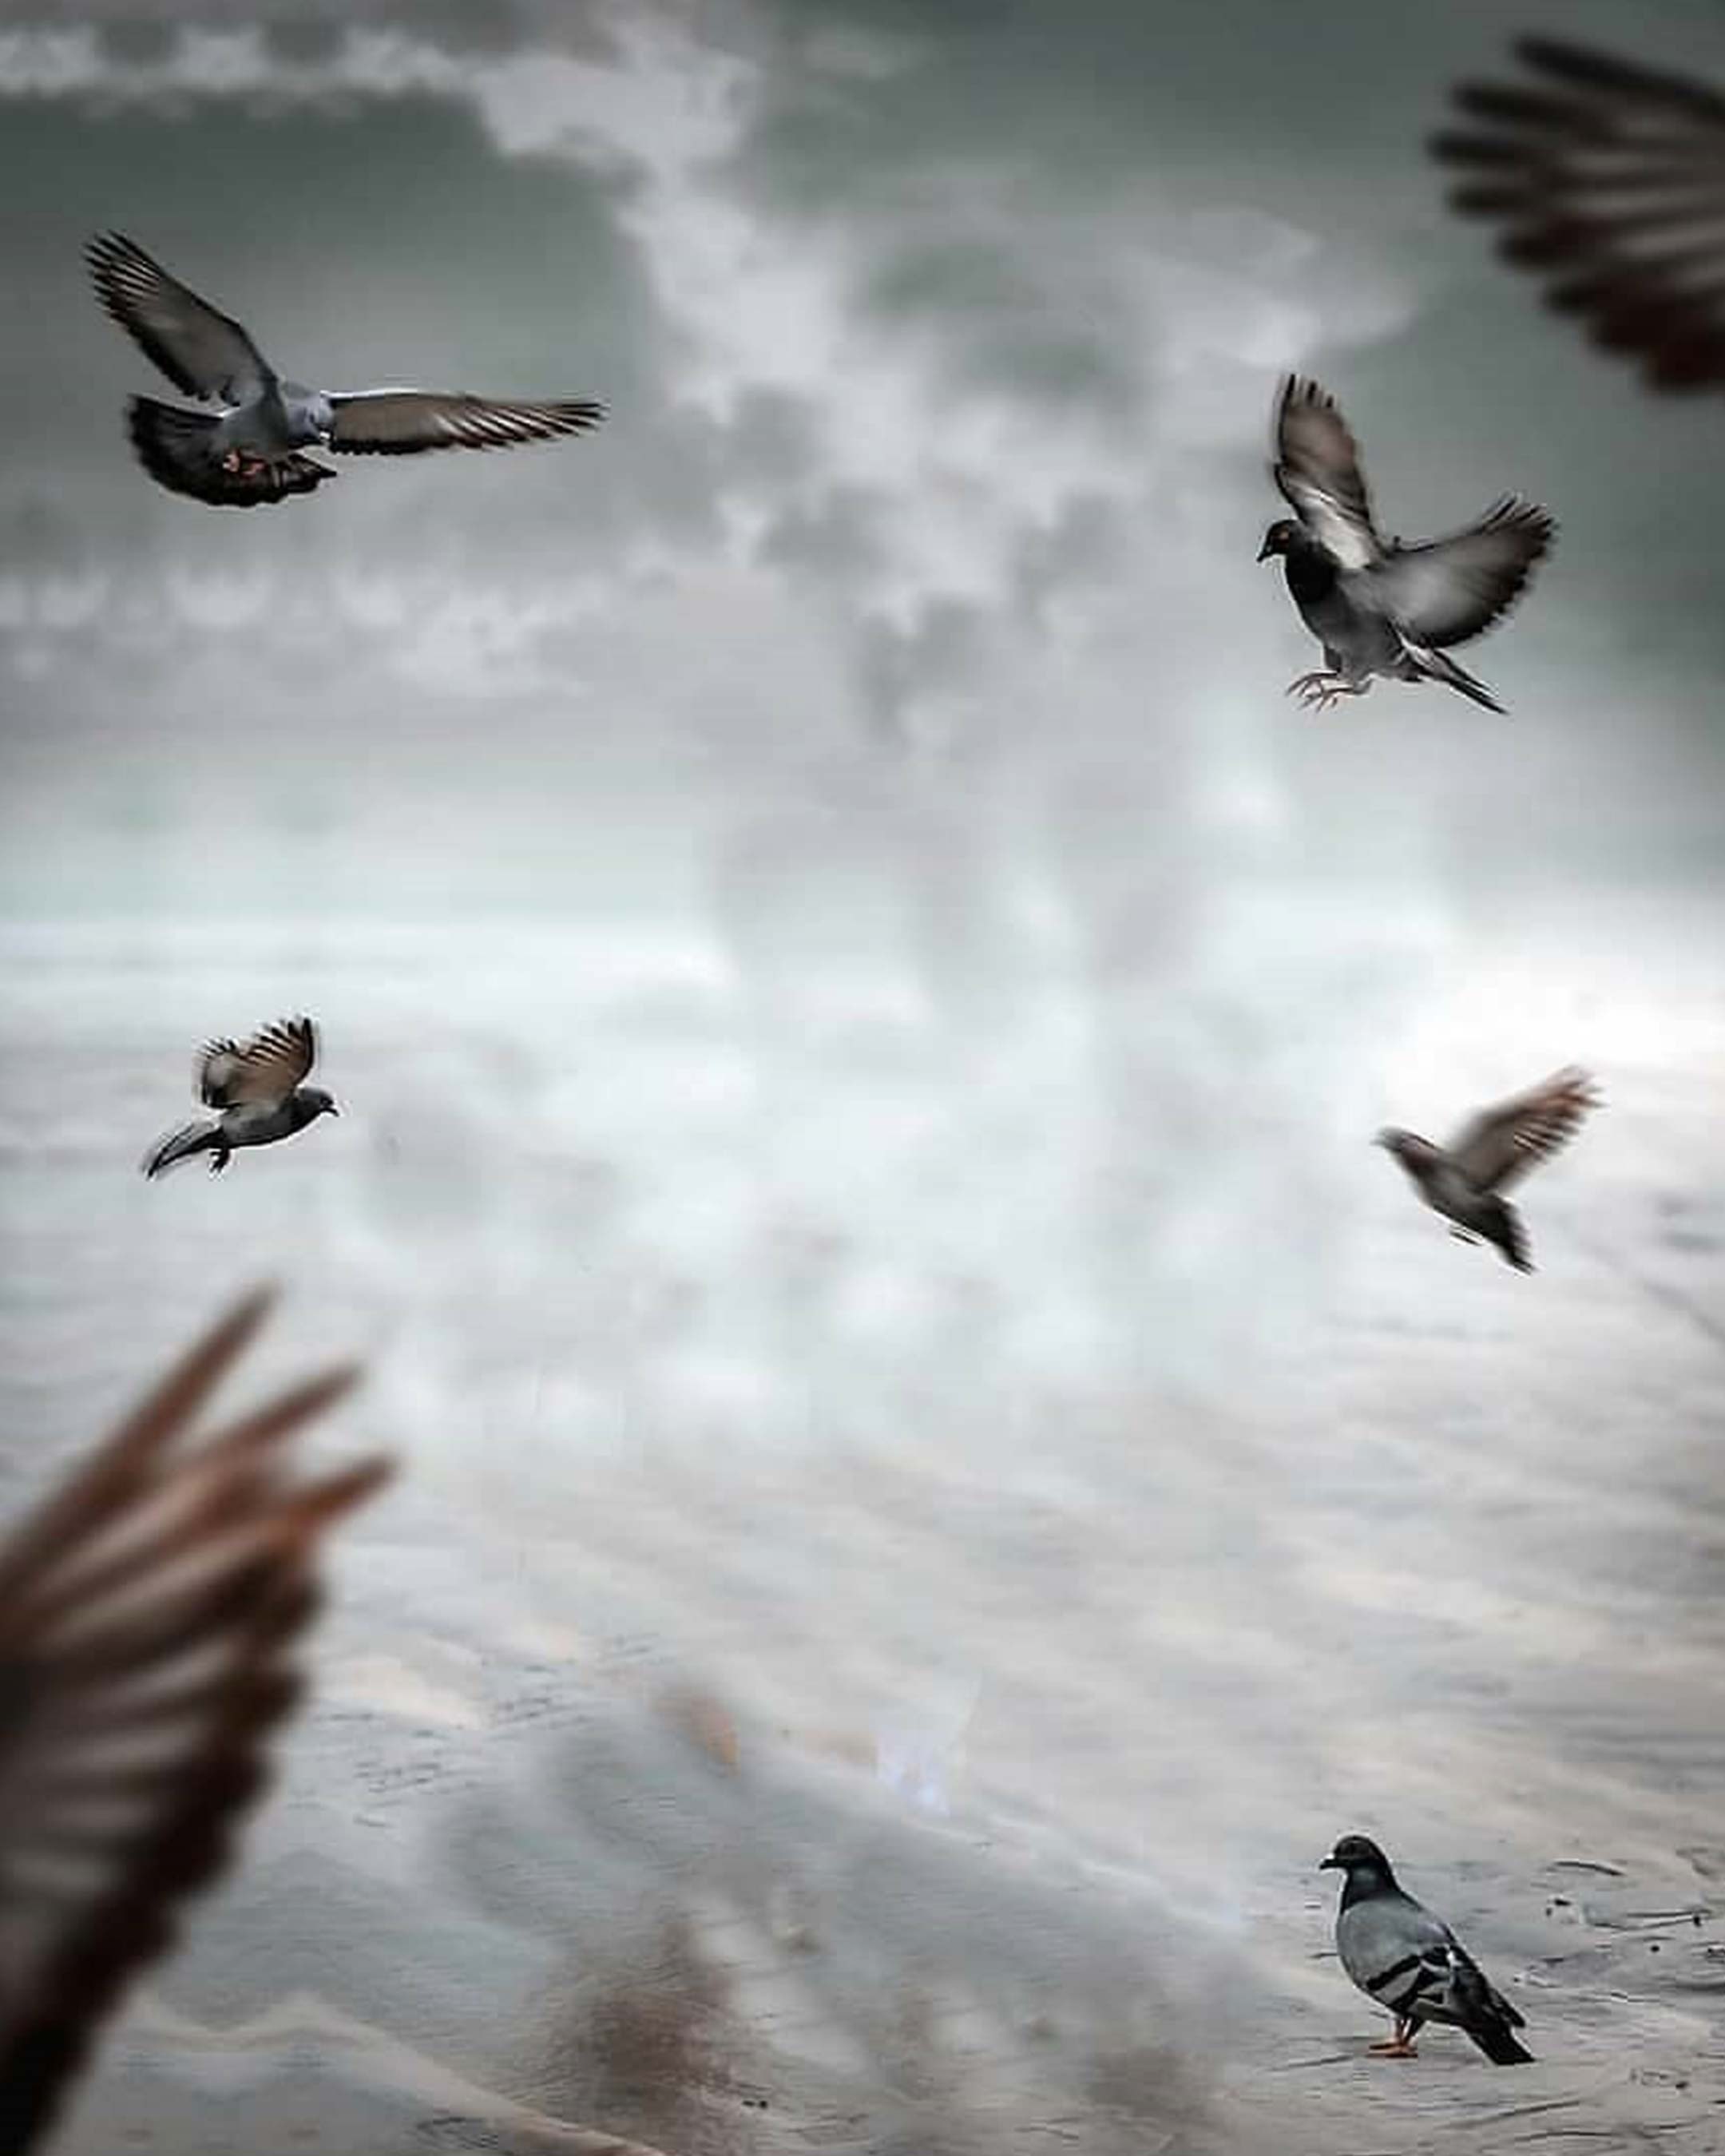 Pigeon Flying PicsArt Background Free Stock Image